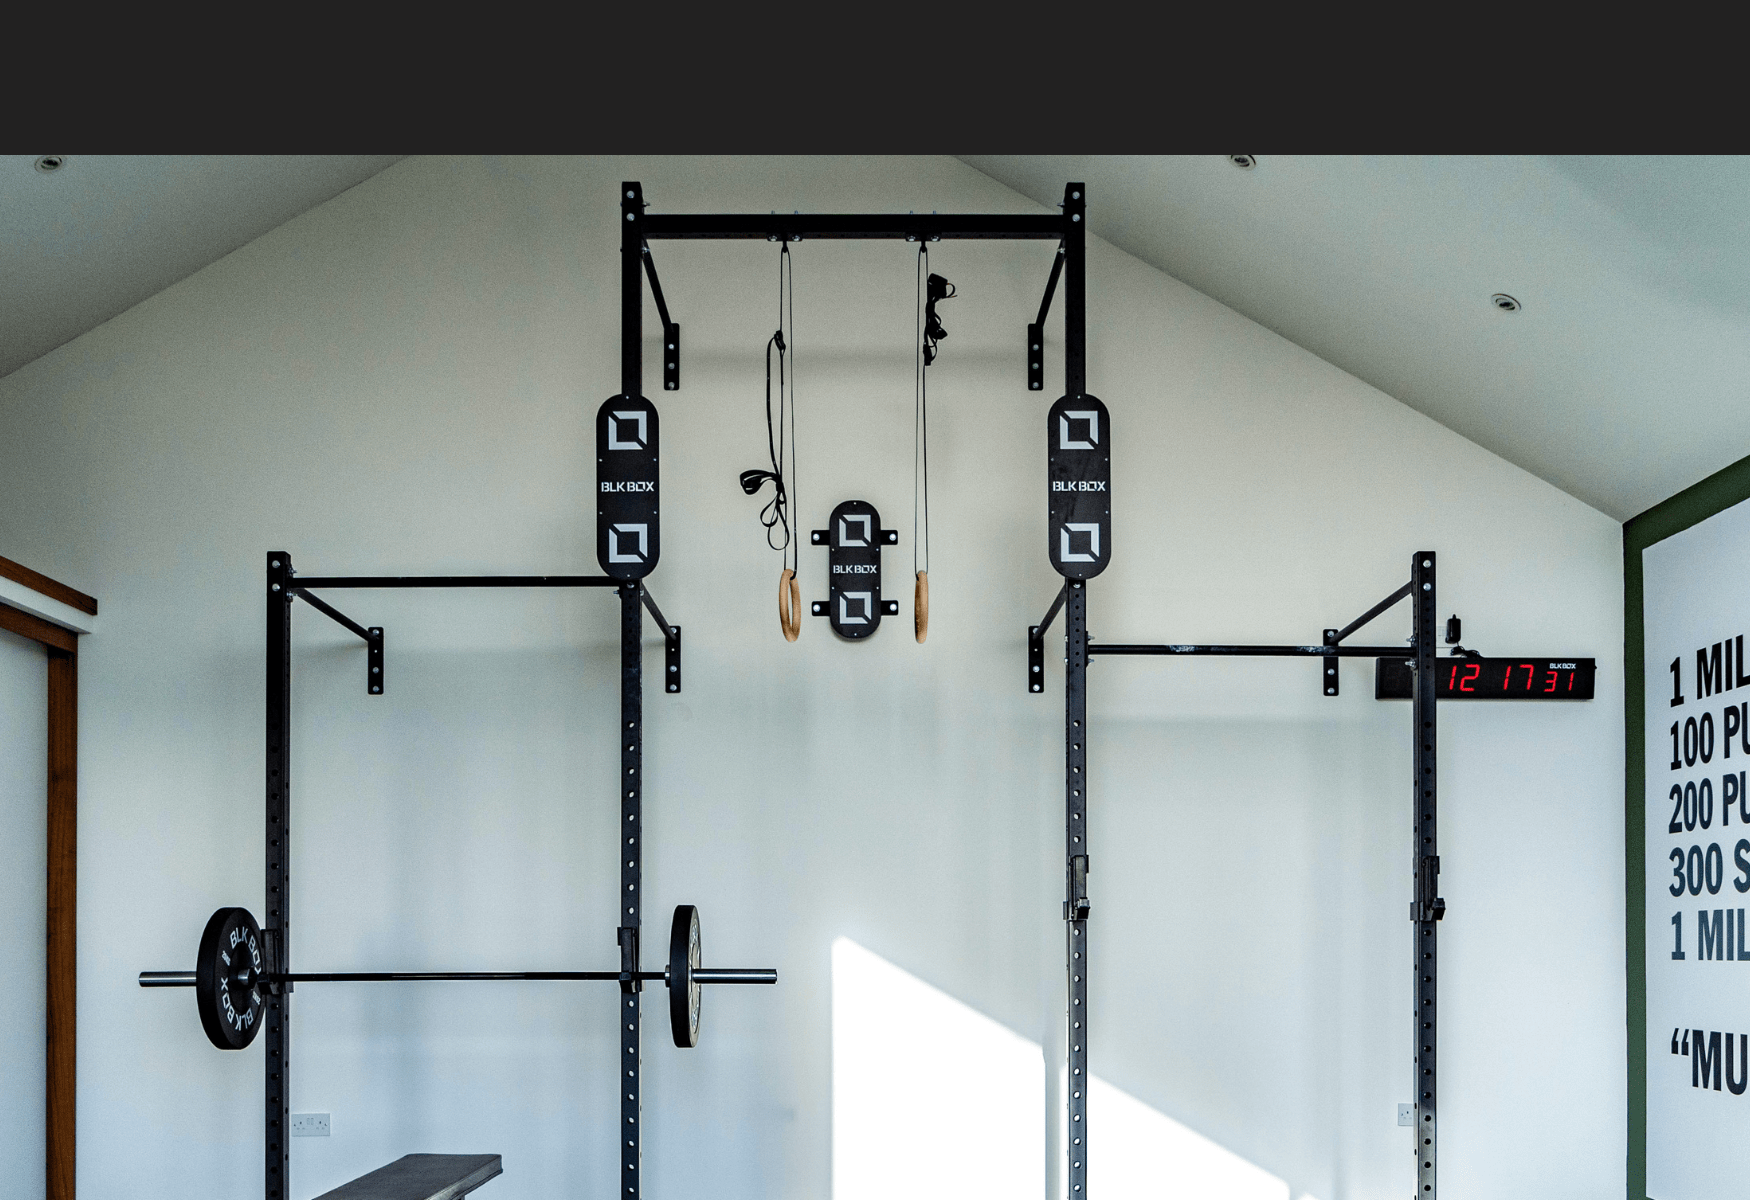 Home Gym Supply - The UK's Home Gym Equipment Specialists